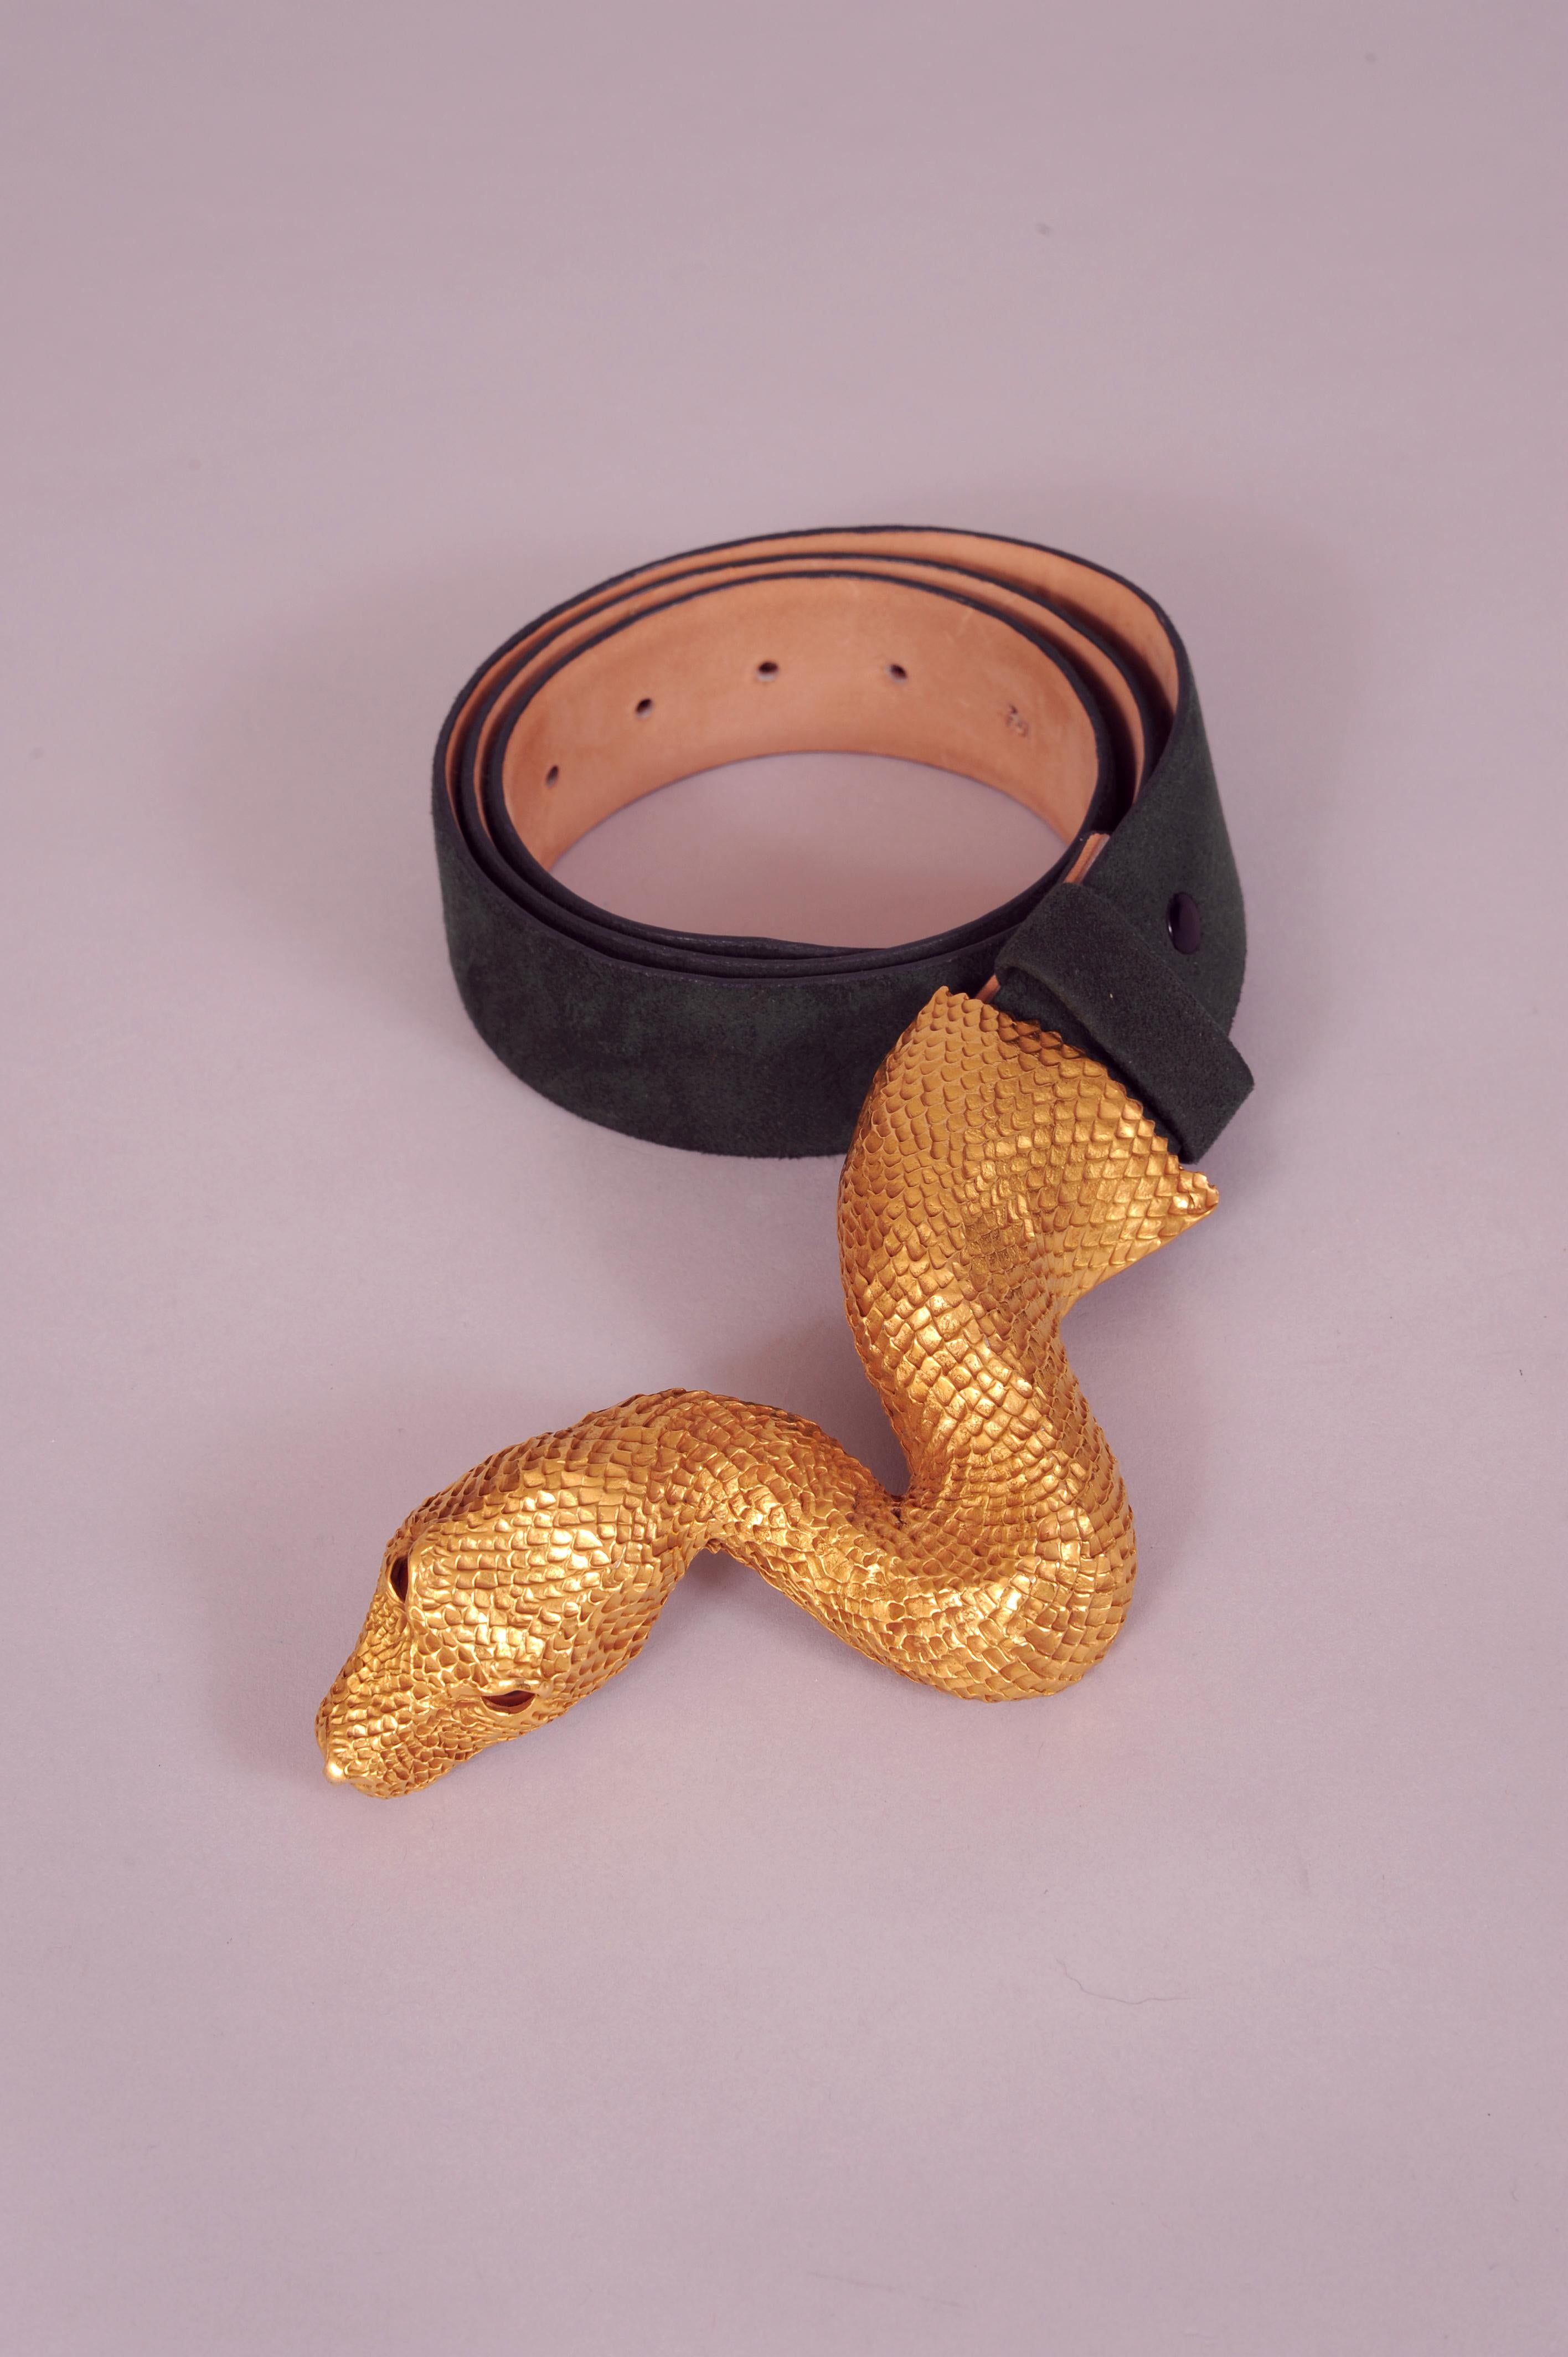 Christopher Ross is famous for his sculptural animal head belt buckles. This buckle is 24 karat gold plated with amber glass cabochon eyes. It is signed on the back and dated 1980. It is in excellent condition and shows no signs of wear. The Halston